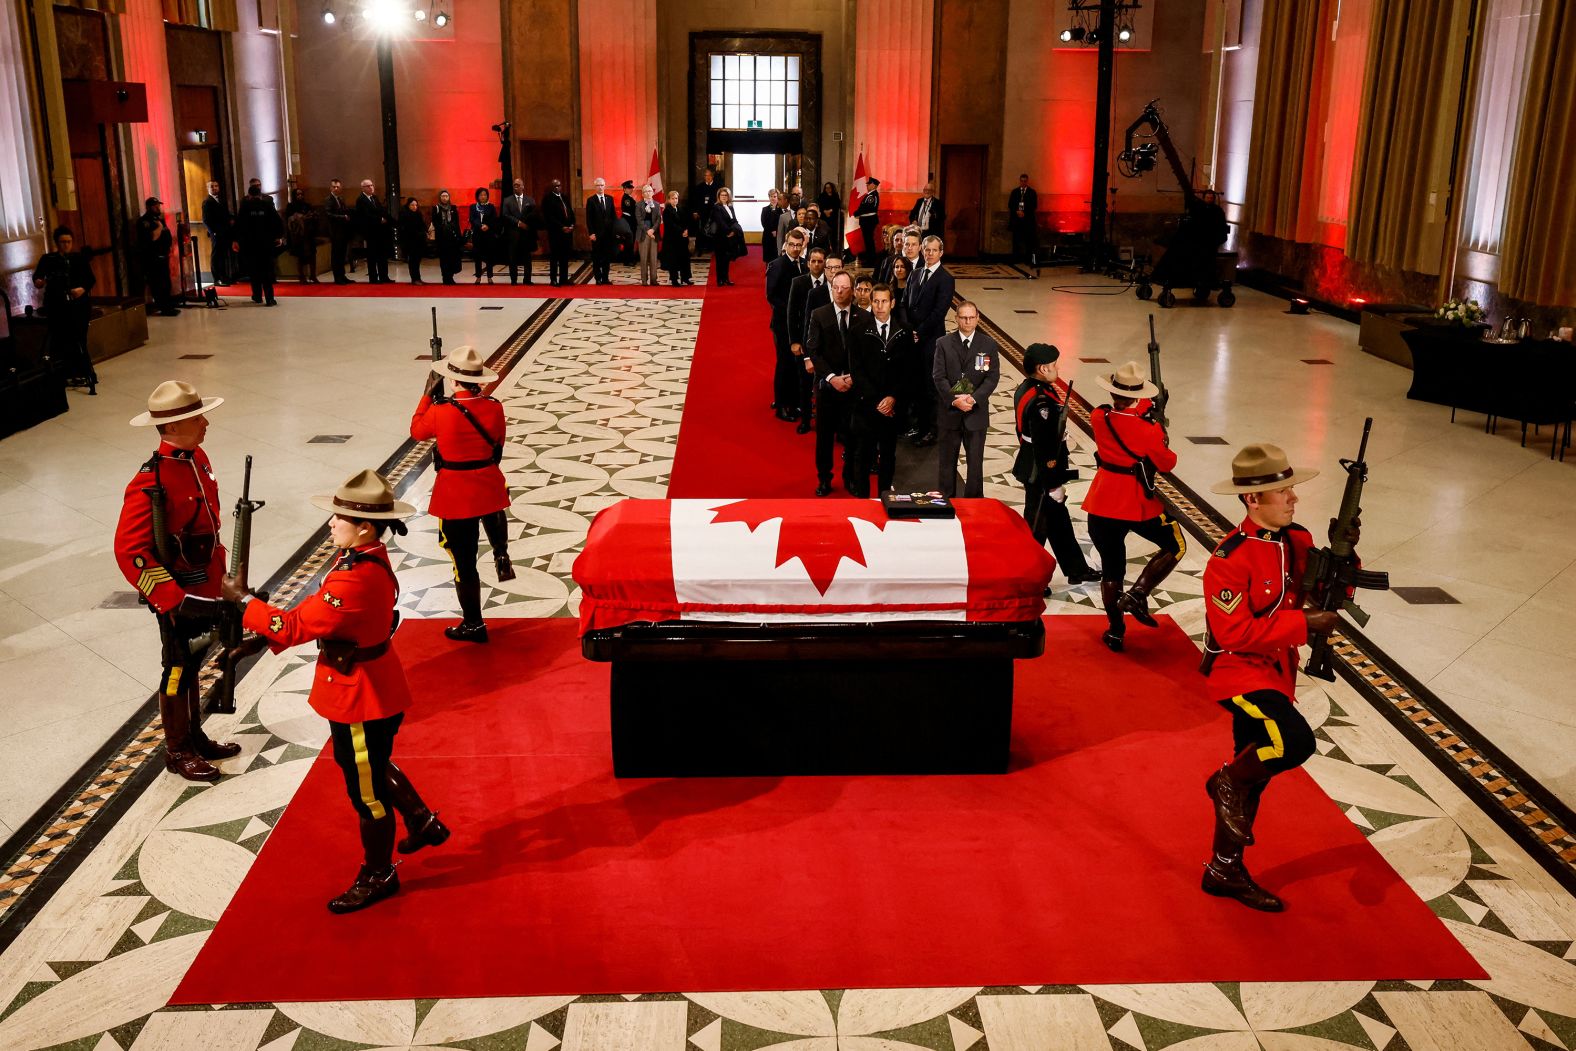 The casket of former Canadian Prime Minister <a href="https://www.cnn.com/2024/02/29/americas/brian-mulroney-obit/index.html" target="_blank">Brian Mulroney</a> lies in state ahead of his funeral in Ottawa, Ontario, Canada, on Tuesday, March 19. Mulroney served as Canada's prime minister from 1984 through 1993.